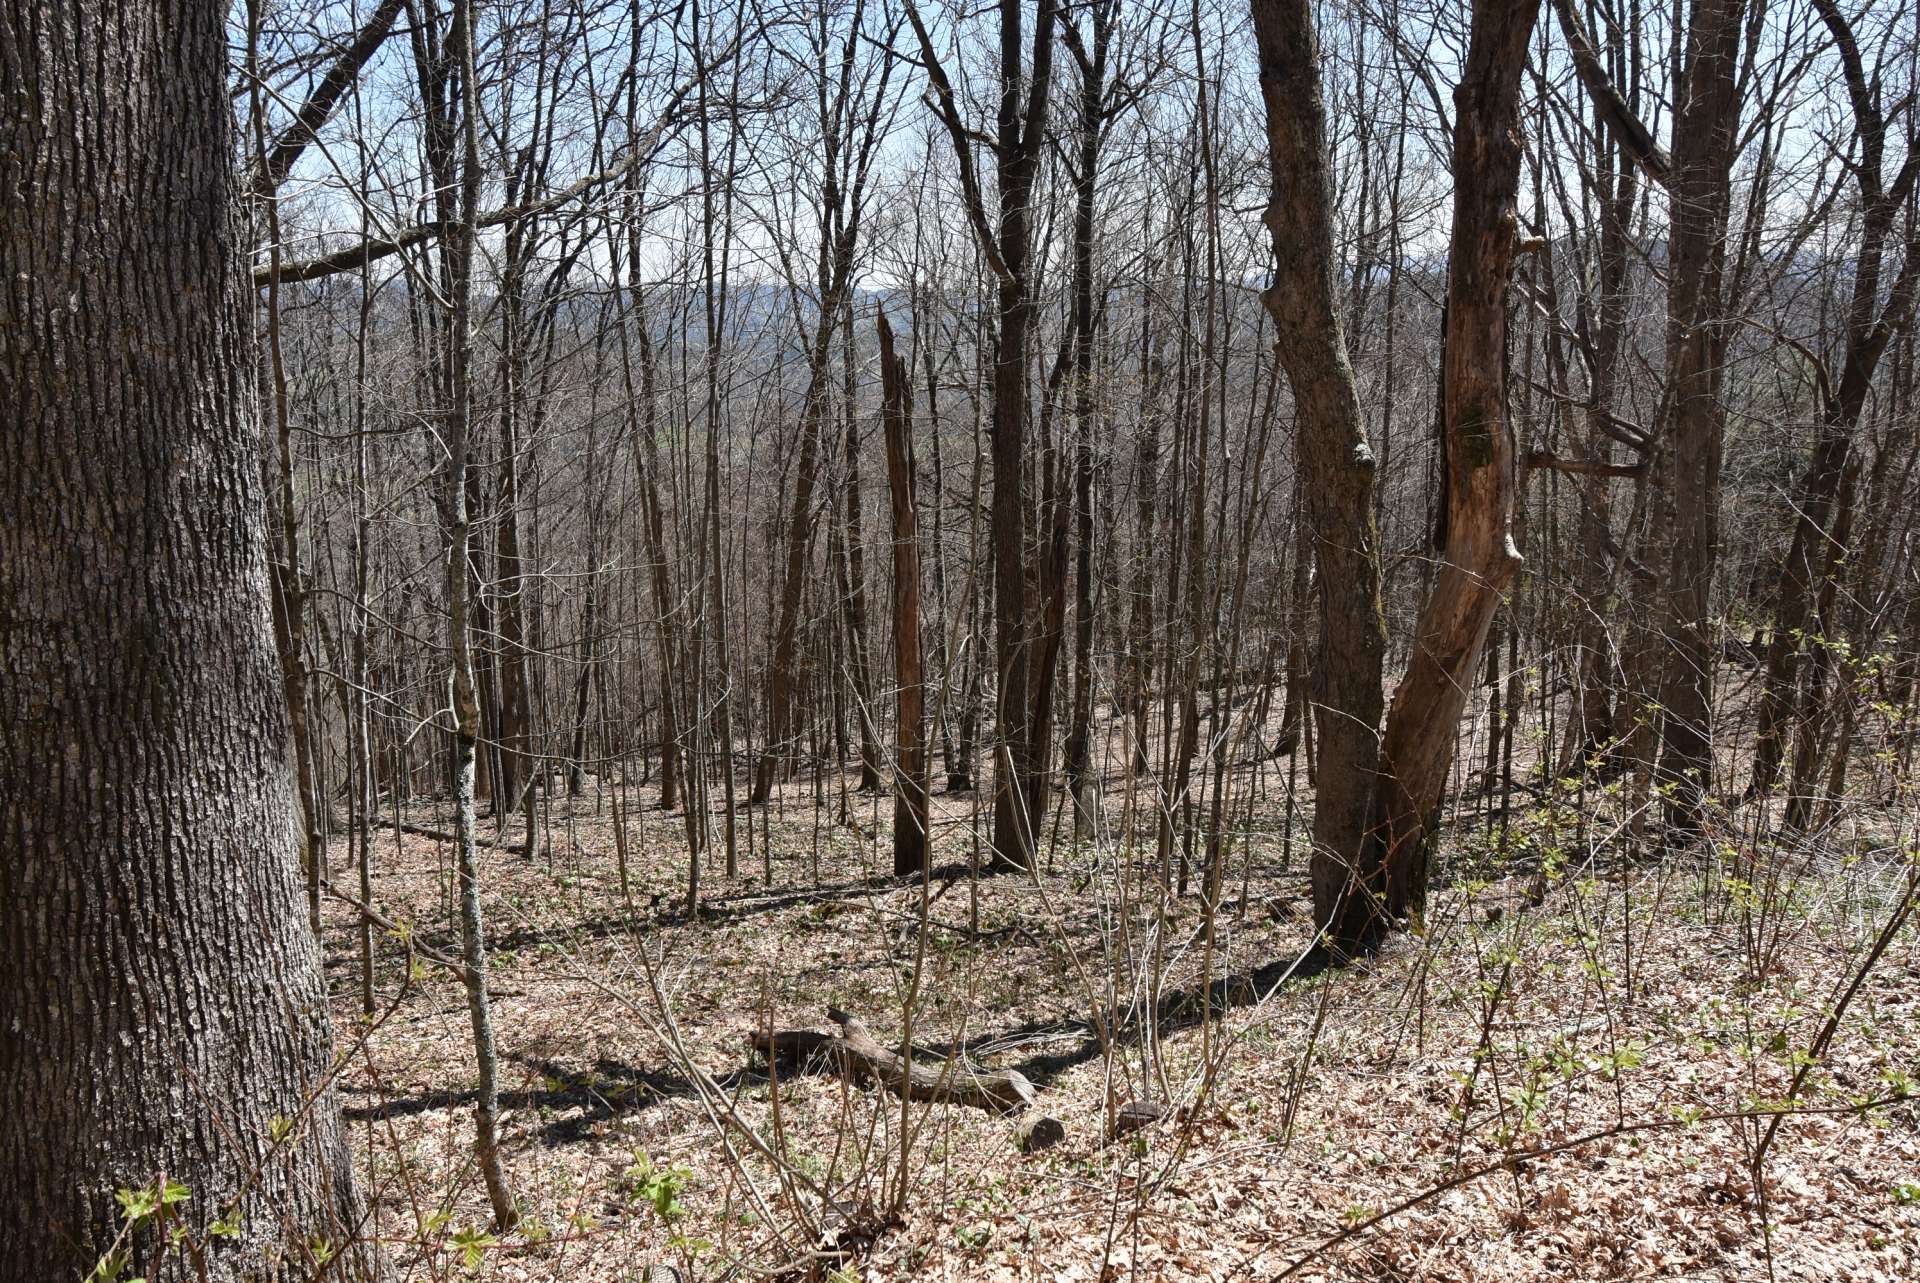 Offered at $30,000, this  homesite is ideal for your dream NC Mountain cabin or forever home.  Call today for additional details on listing S280.